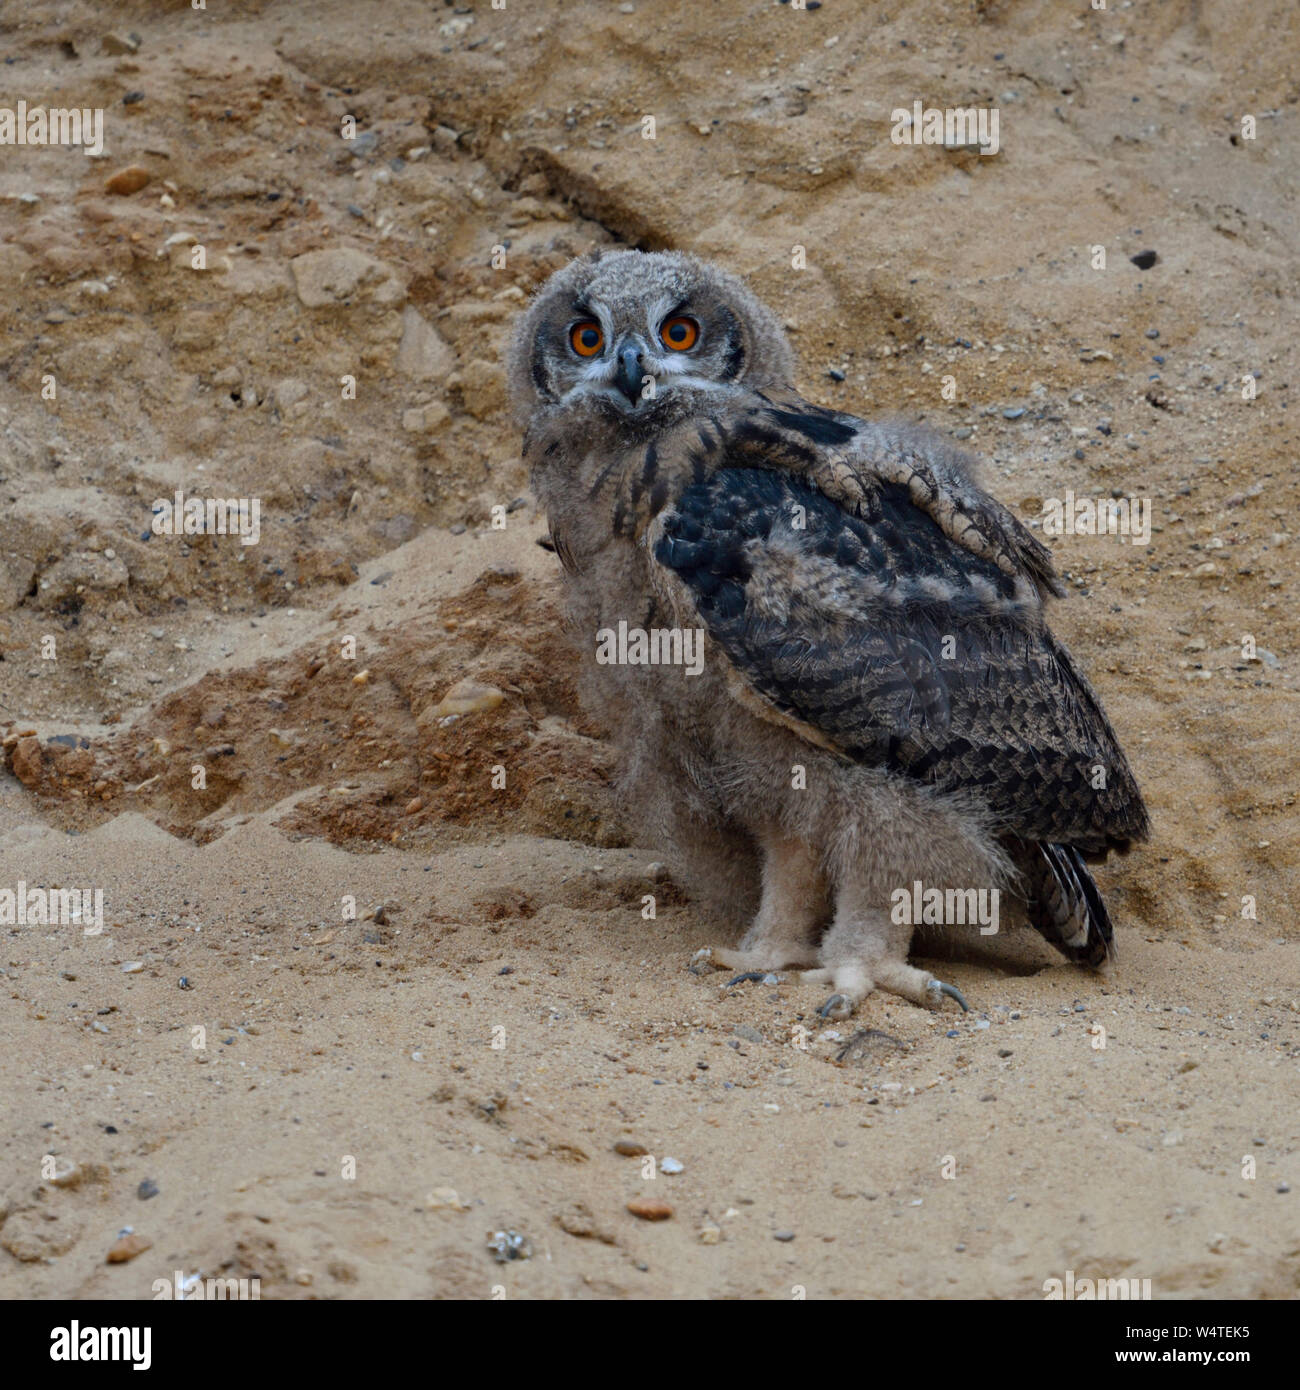 Eurasian Eagle Owl / Europaeischer Uhu ( Bubo bubo ), young chick, owlet standing in the wall of a sand pit, moulting plumage, wildlife, Europe. Stock Photo